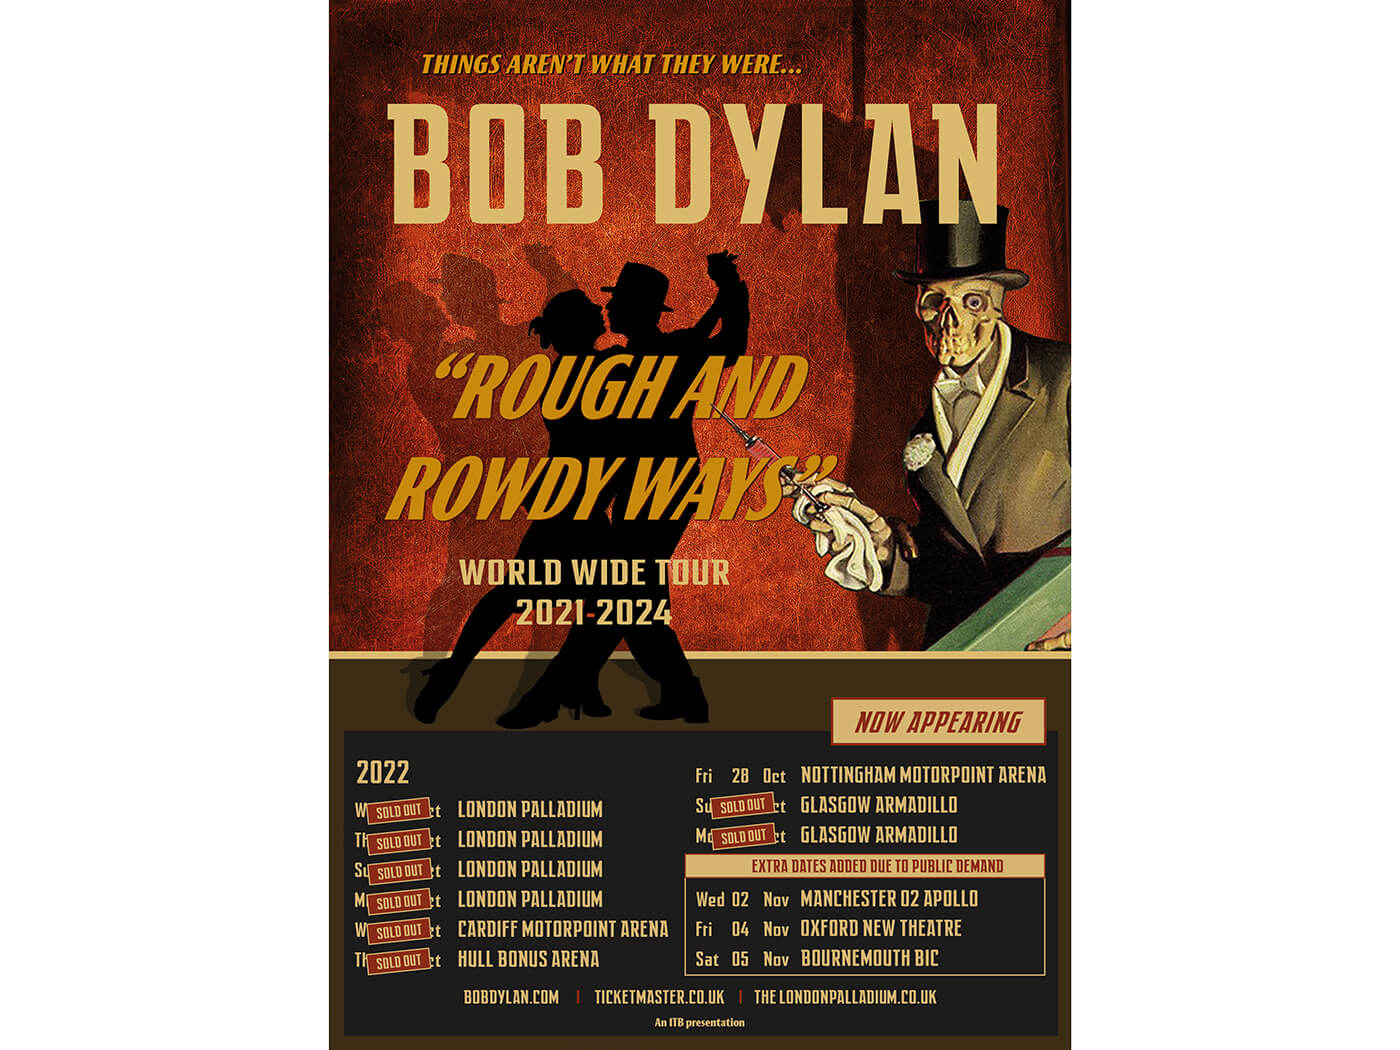 Bob Dylan adds new dates to UK tour